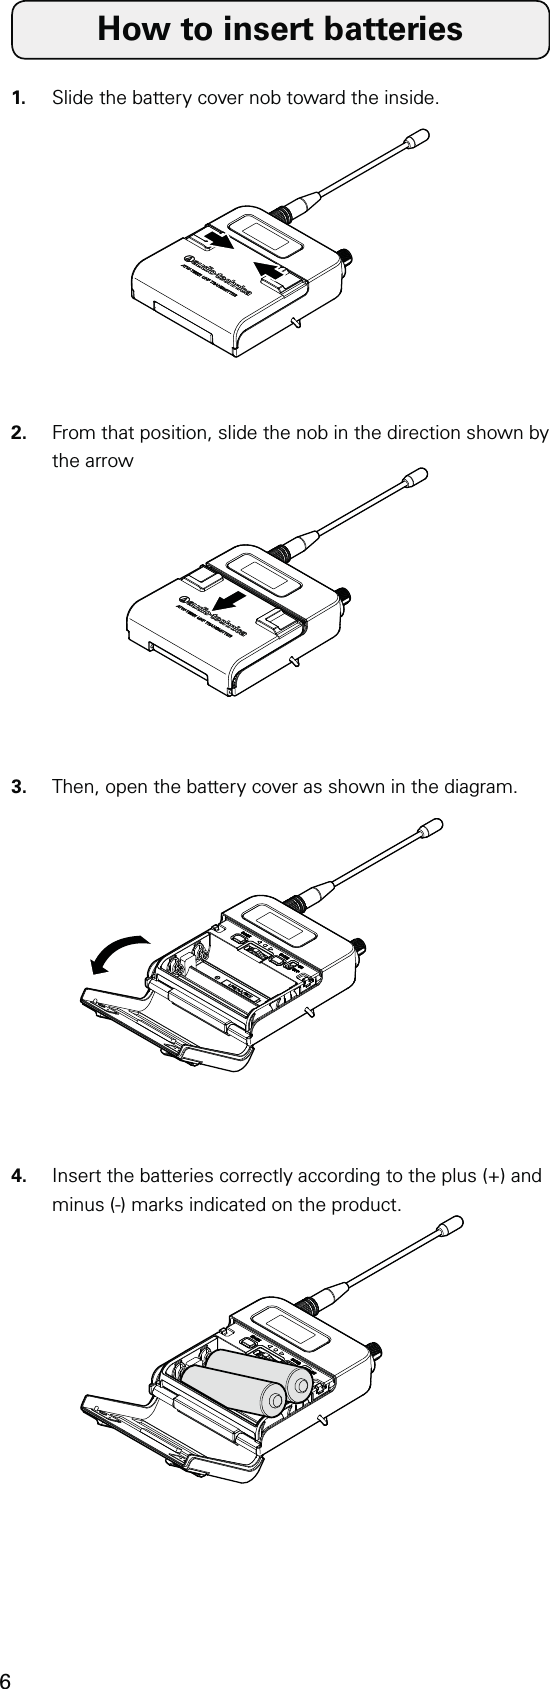 6How to insert batteries1.  Slide the battery cover nob toward the inside.2.  From that position, slide the nob in the direction shown by the arrow3.  Then, open the battery cover as shown in the diagram.4.  Insert the batteries correctly according to the plus (+) and minus (-) marks indicated on the product.